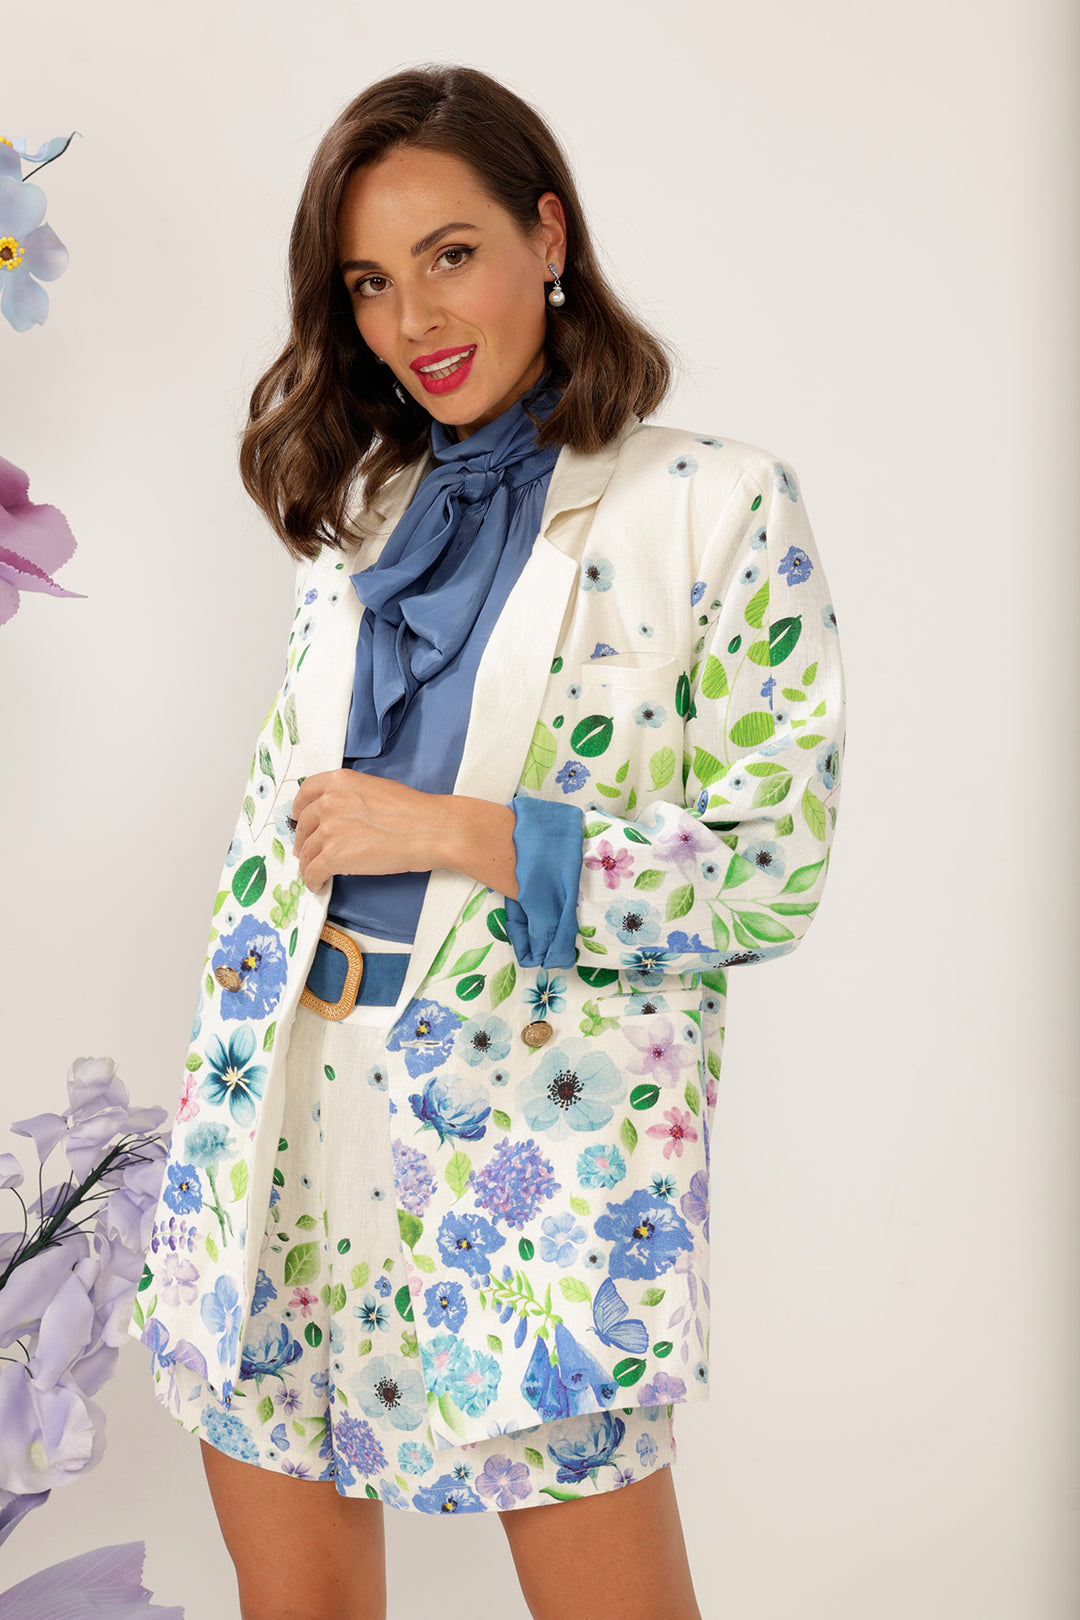 The Buds to Blossom Linen Set by Bonita Collective 